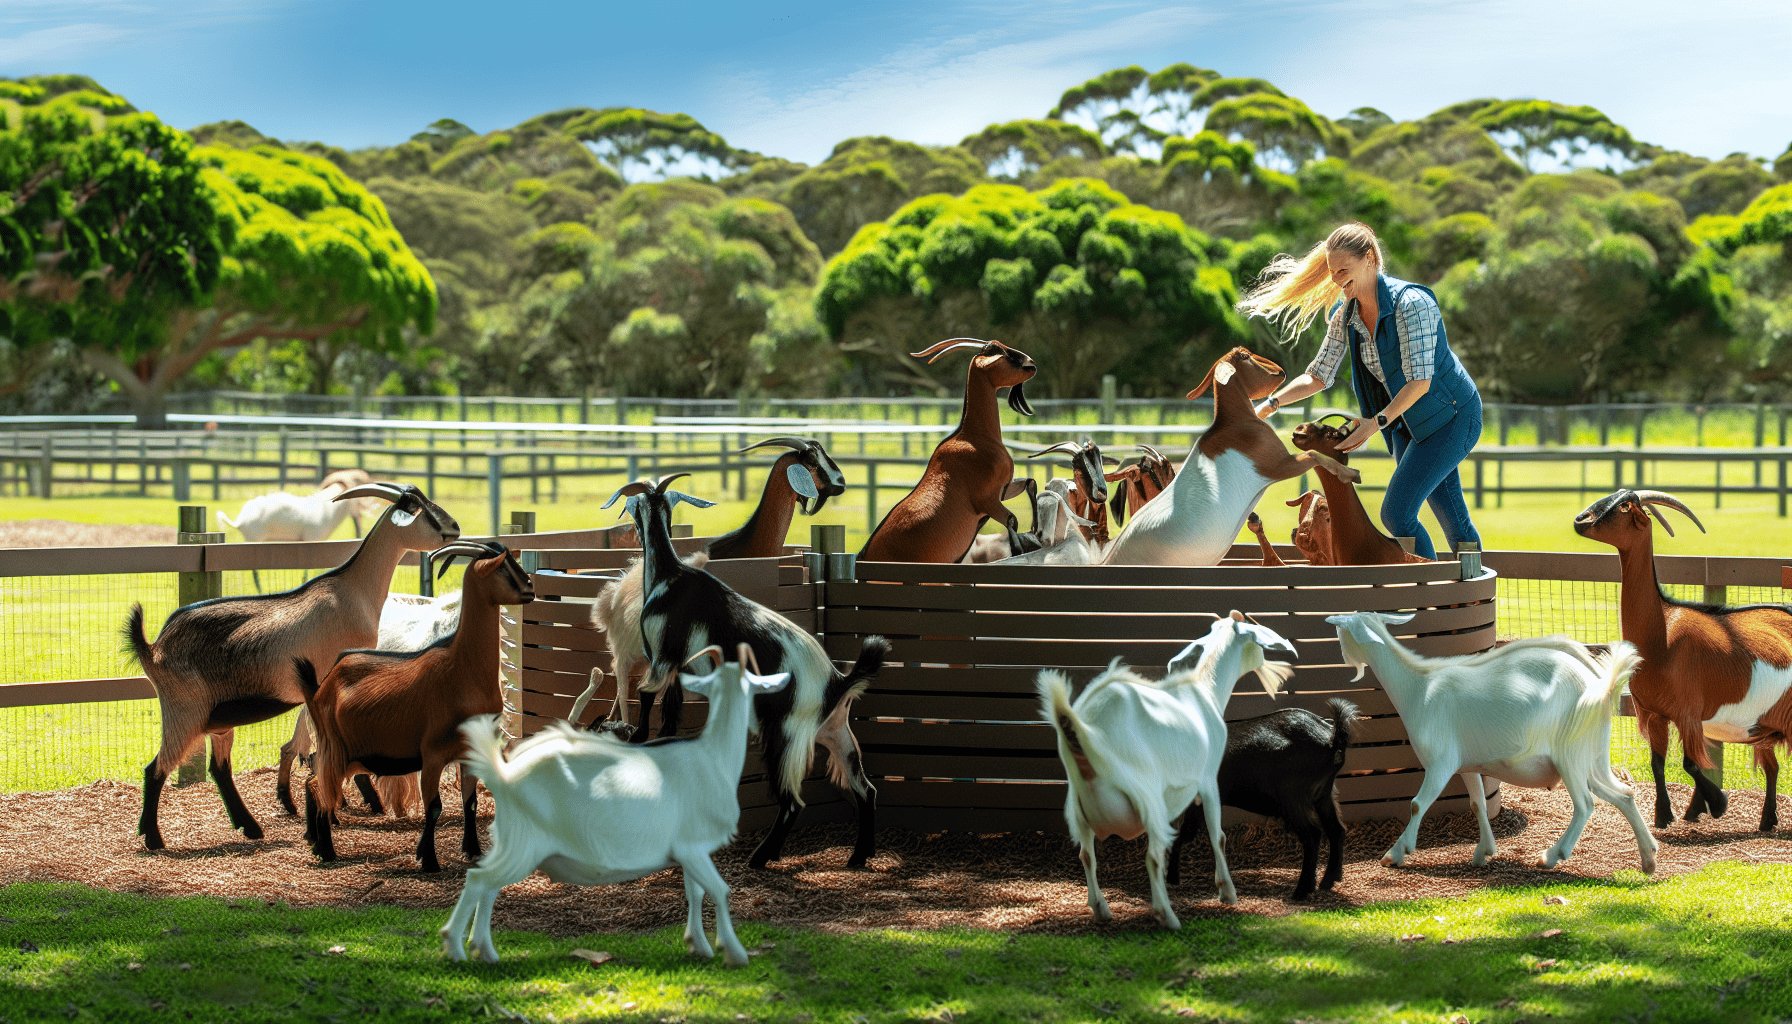 Goats engaging in playful interaction in a spacious enclosure